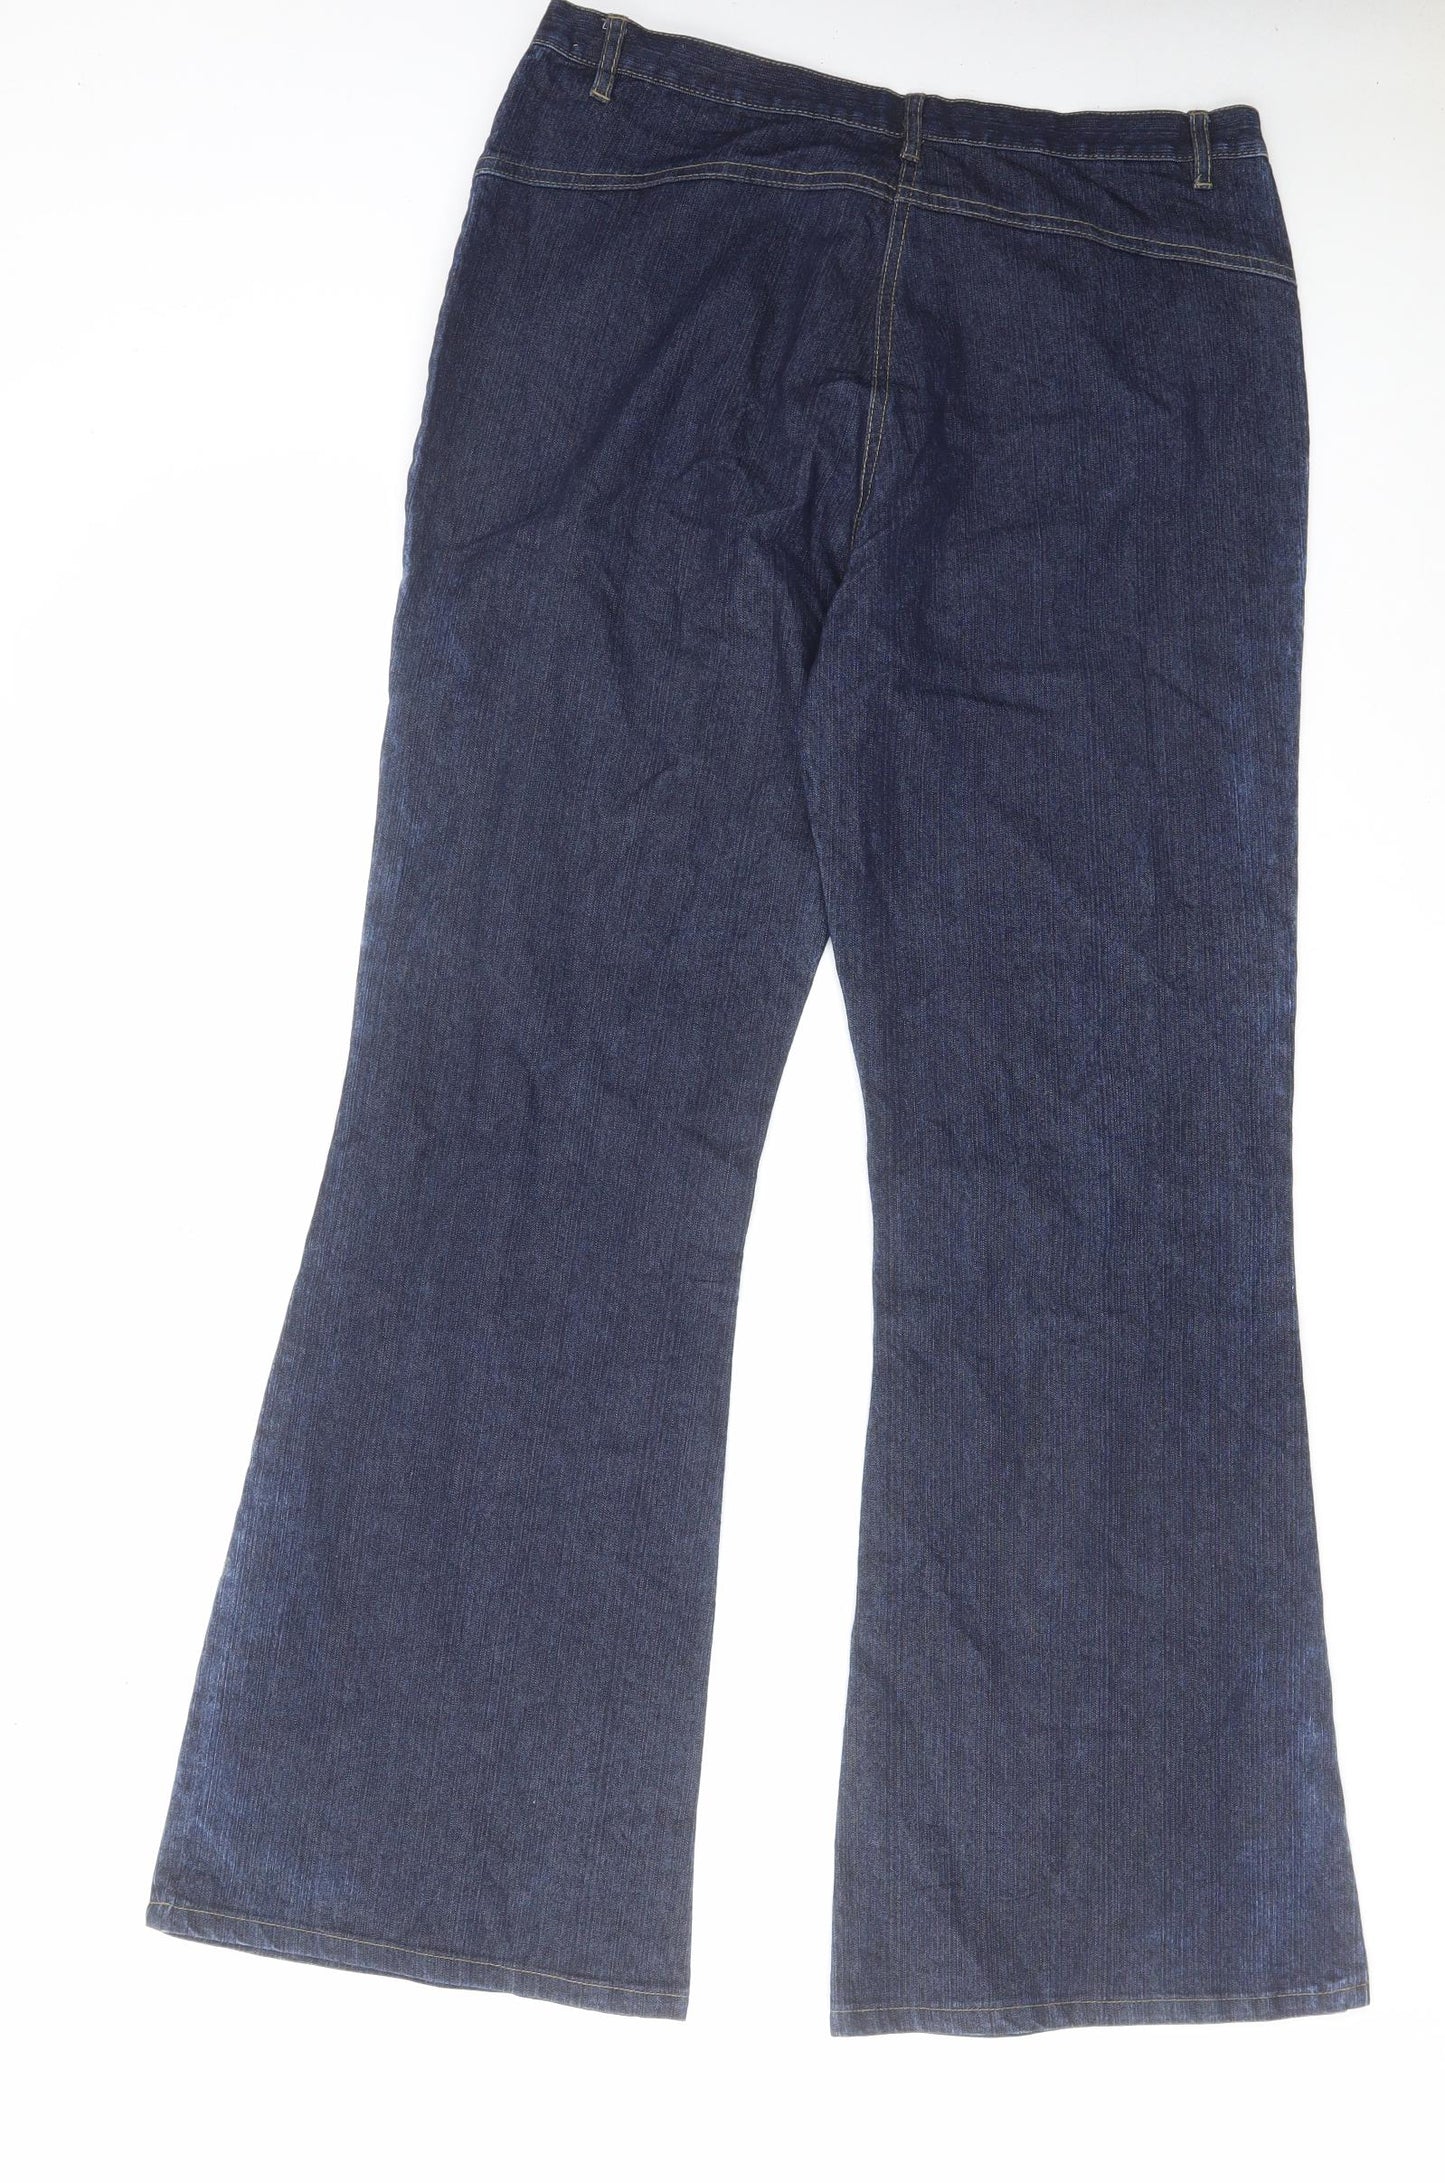 South Womens Blue Cotton Flared Jeans Size 16 L30 in Regular Zip